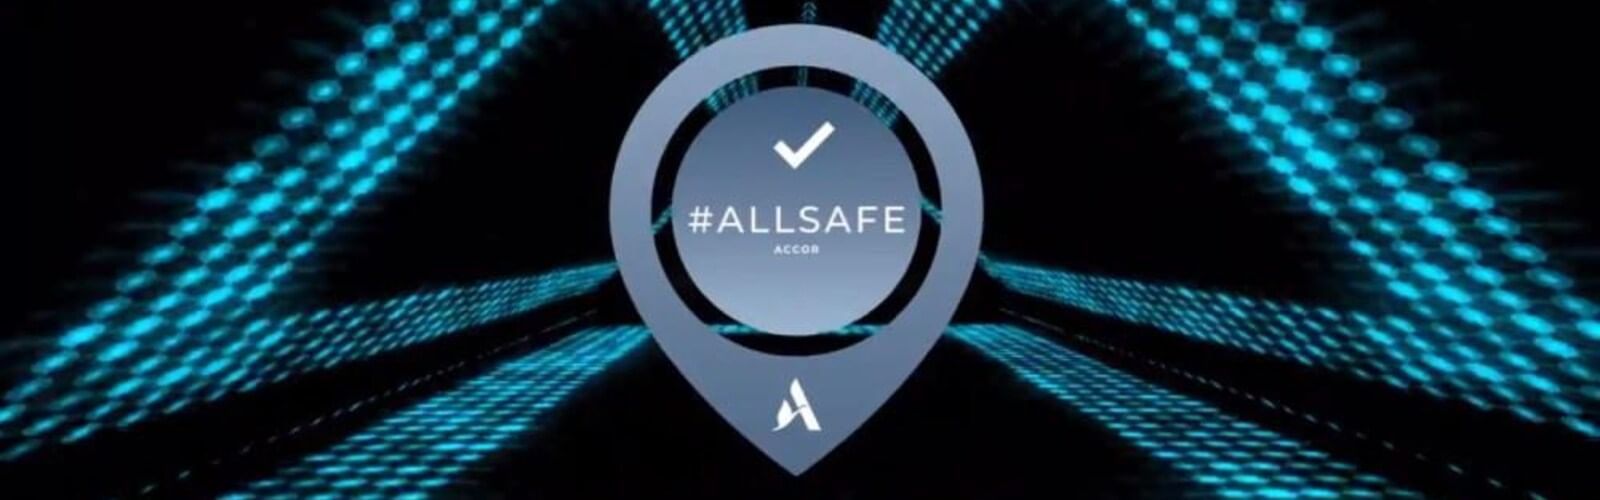 All safe poster used at Pullman Albert Park